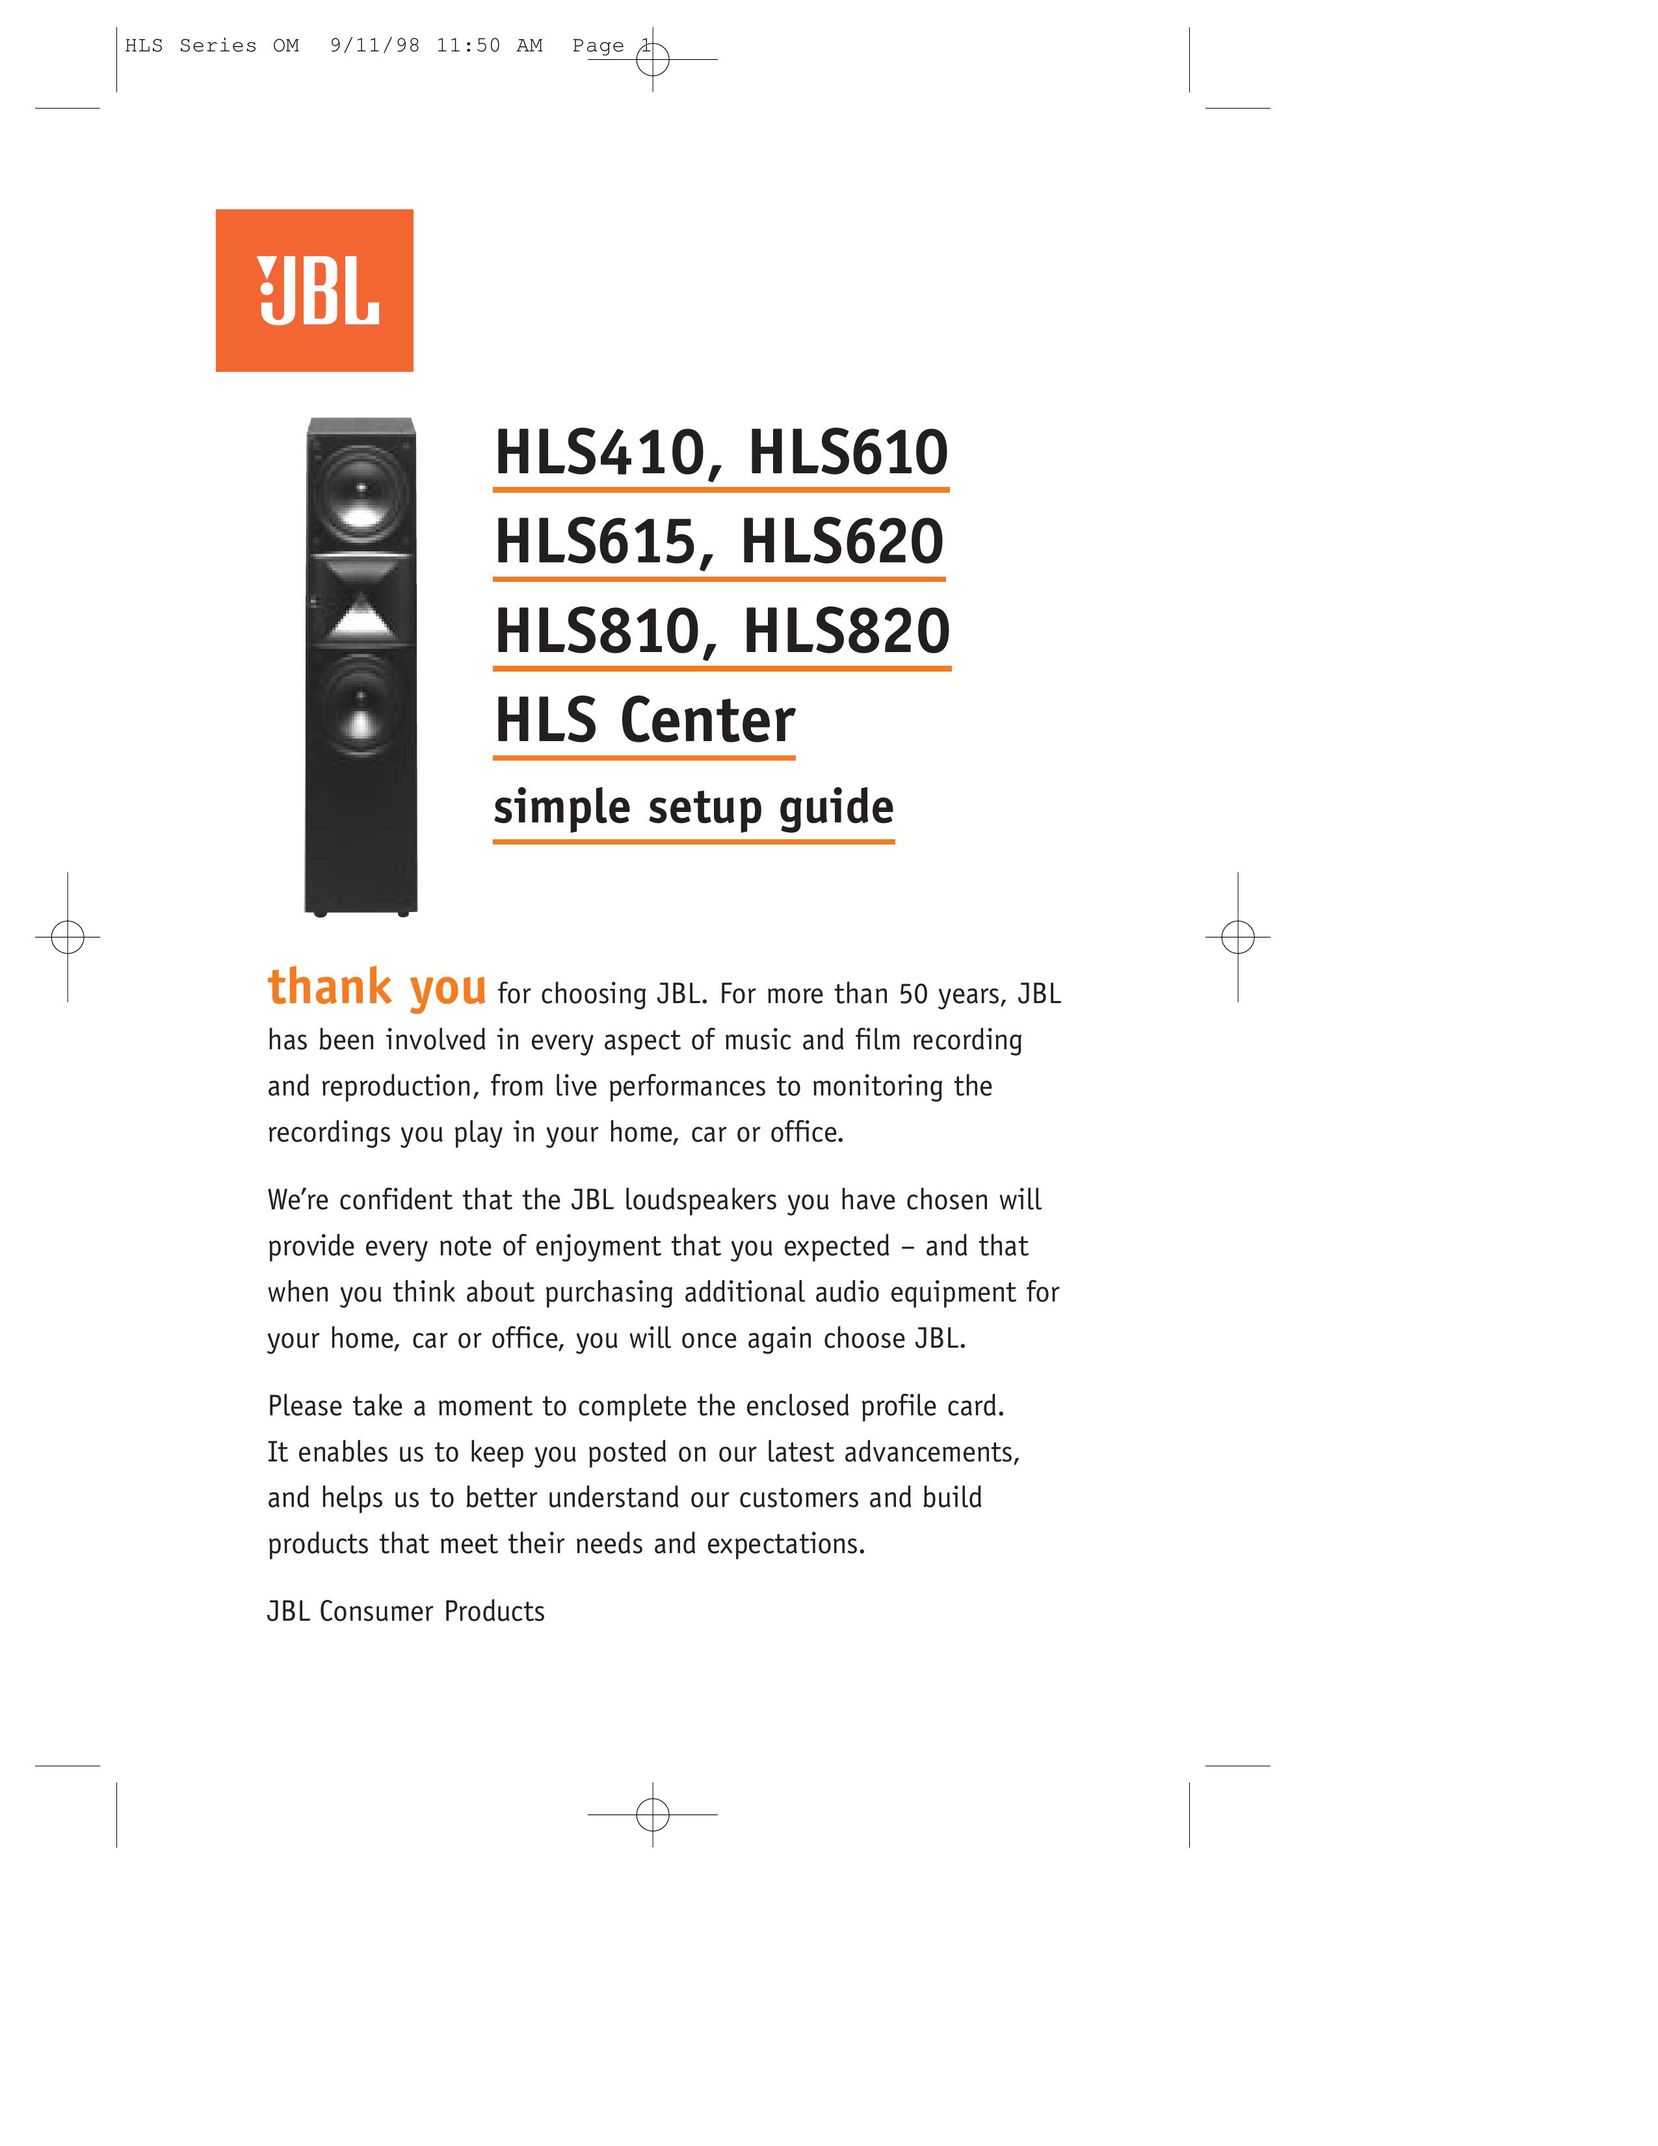 JBL HLS820 Home Theater System User Manual